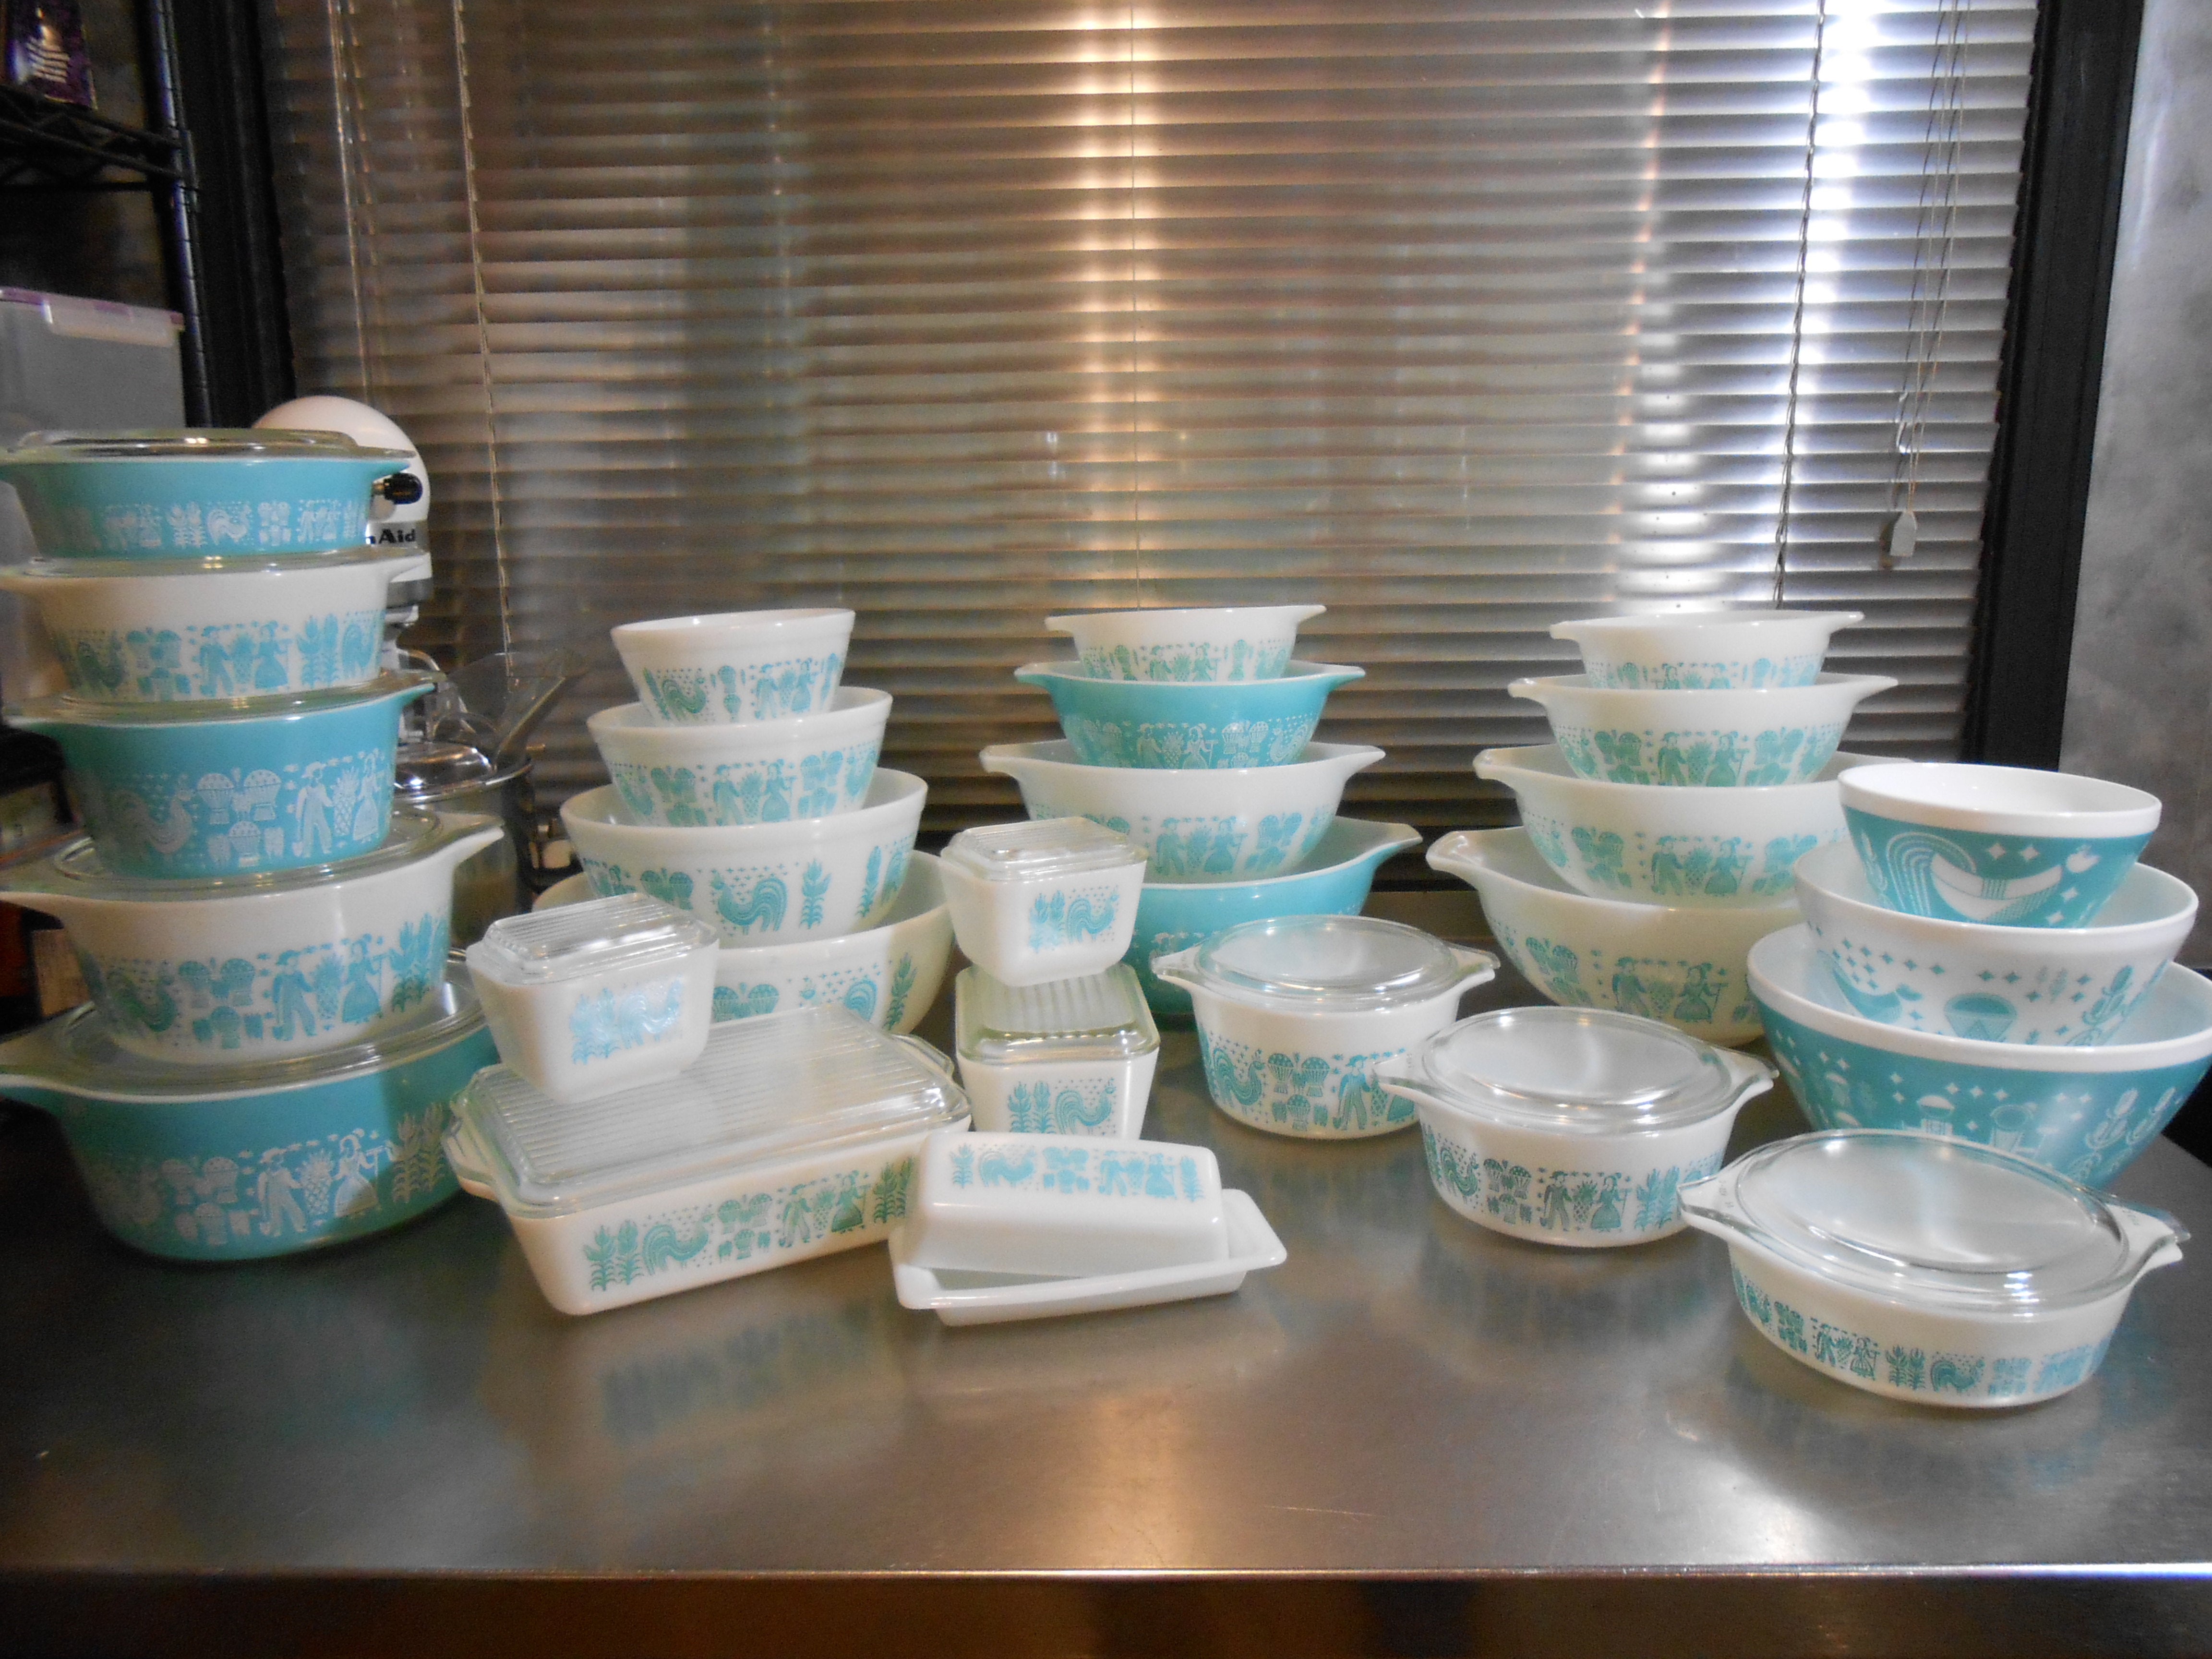 A blue and white set of Amish butterprint patterned Pyrex dishes.